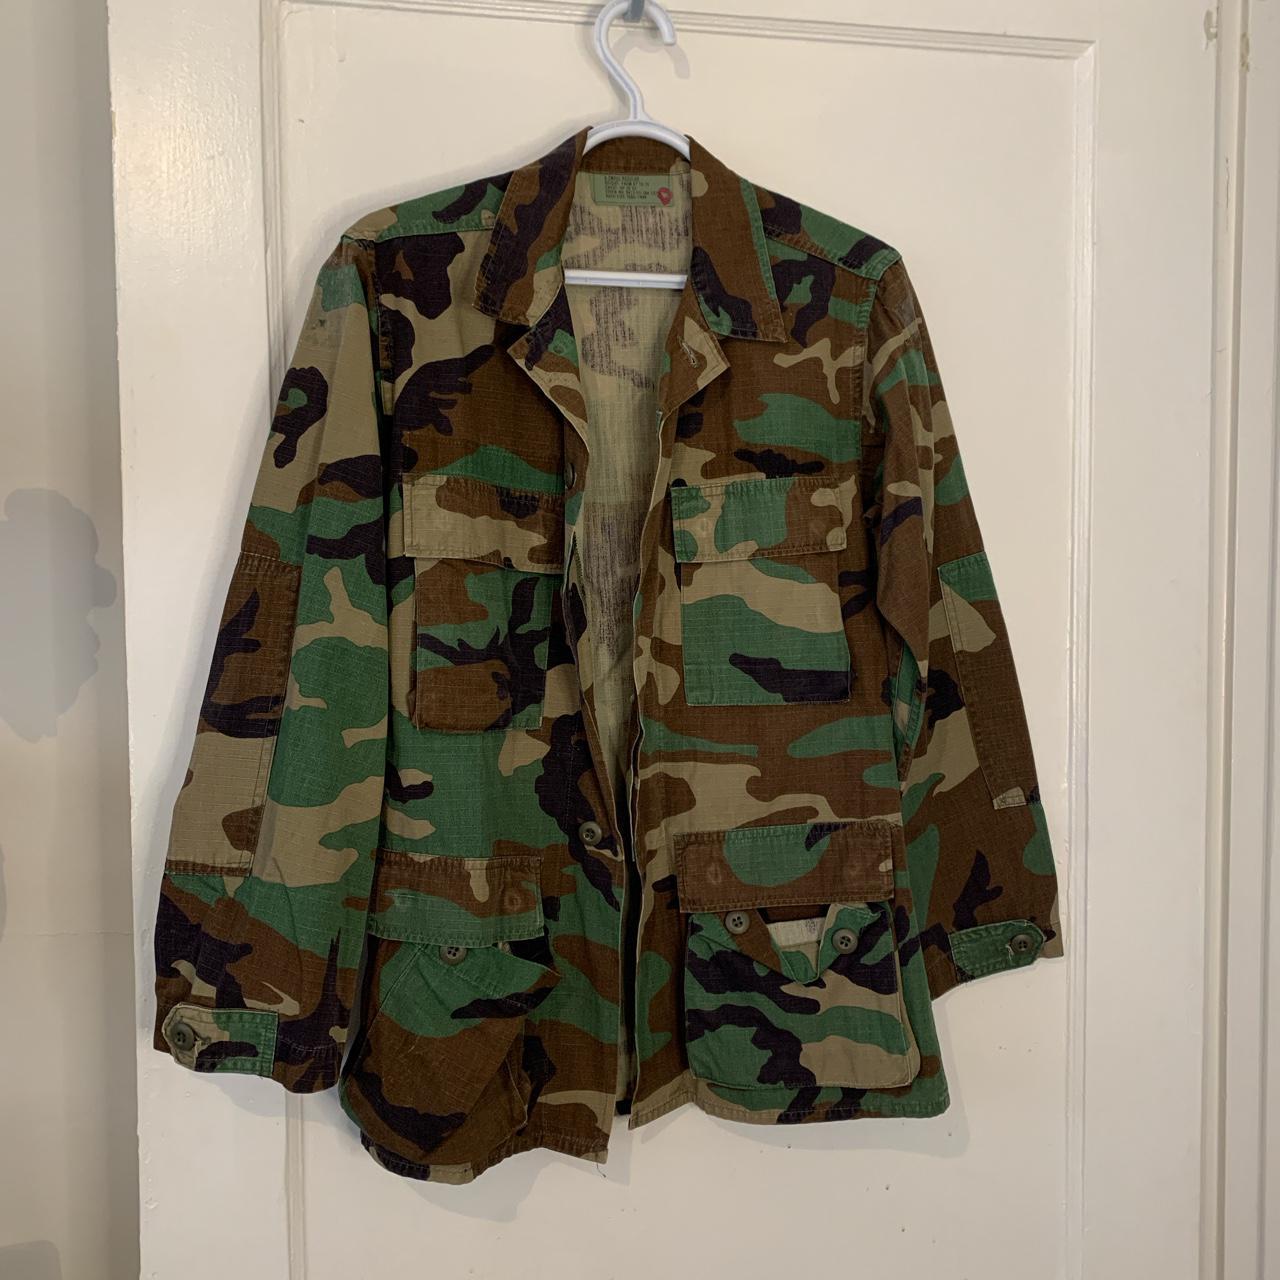 Product Image 1 - Jungle camo army jacket. Appears